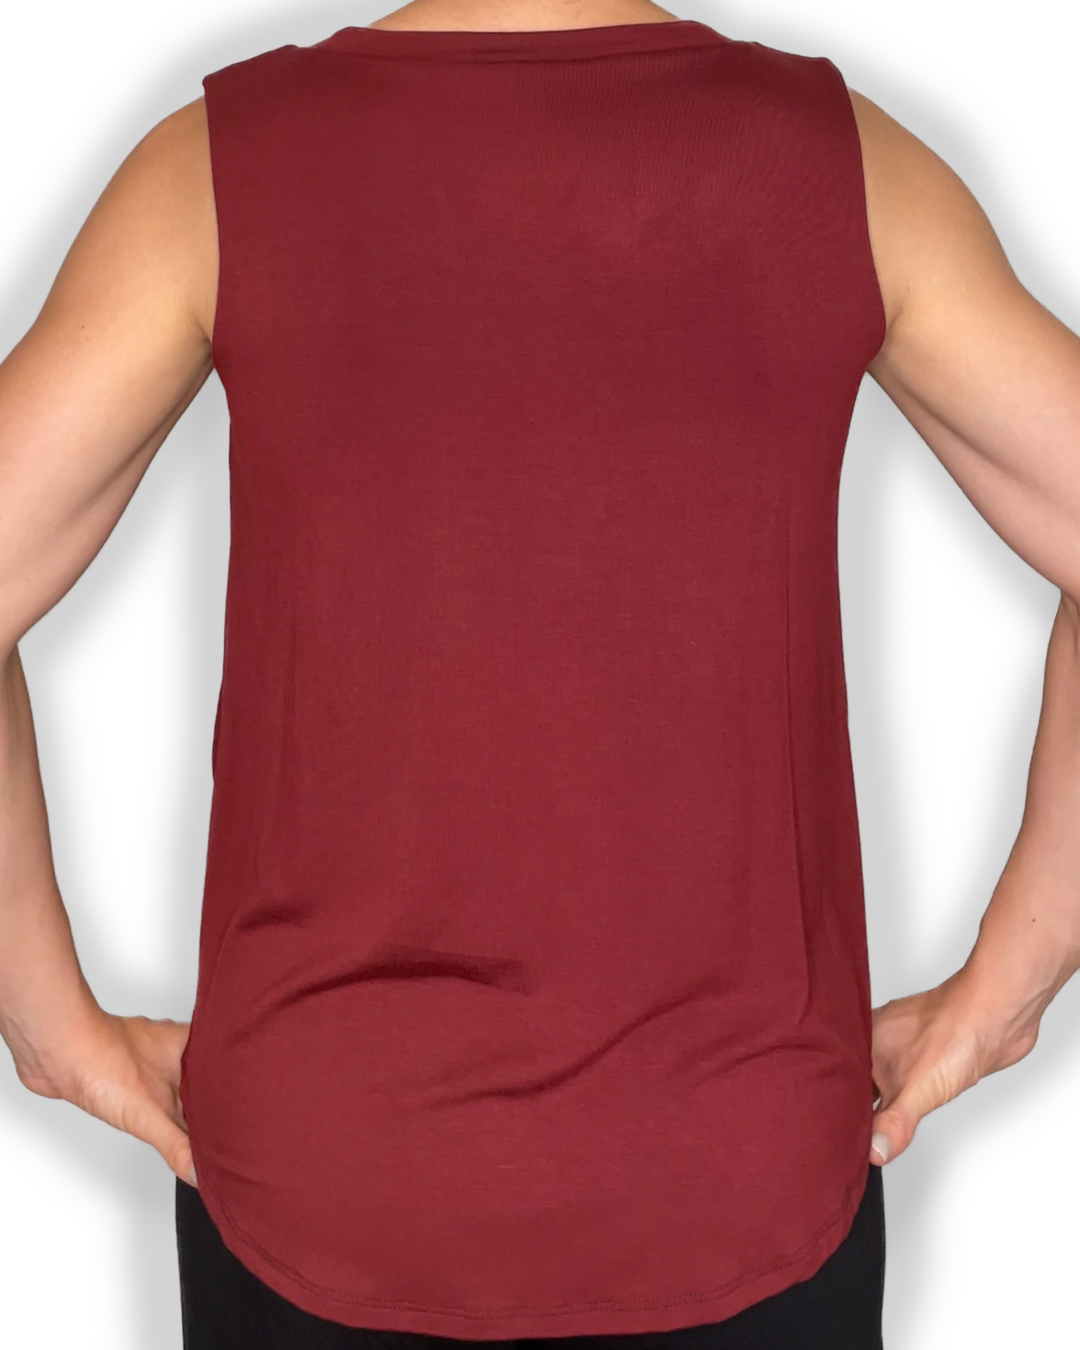 Jia+Kate braless bamboo top in maroon color Ashley style back view